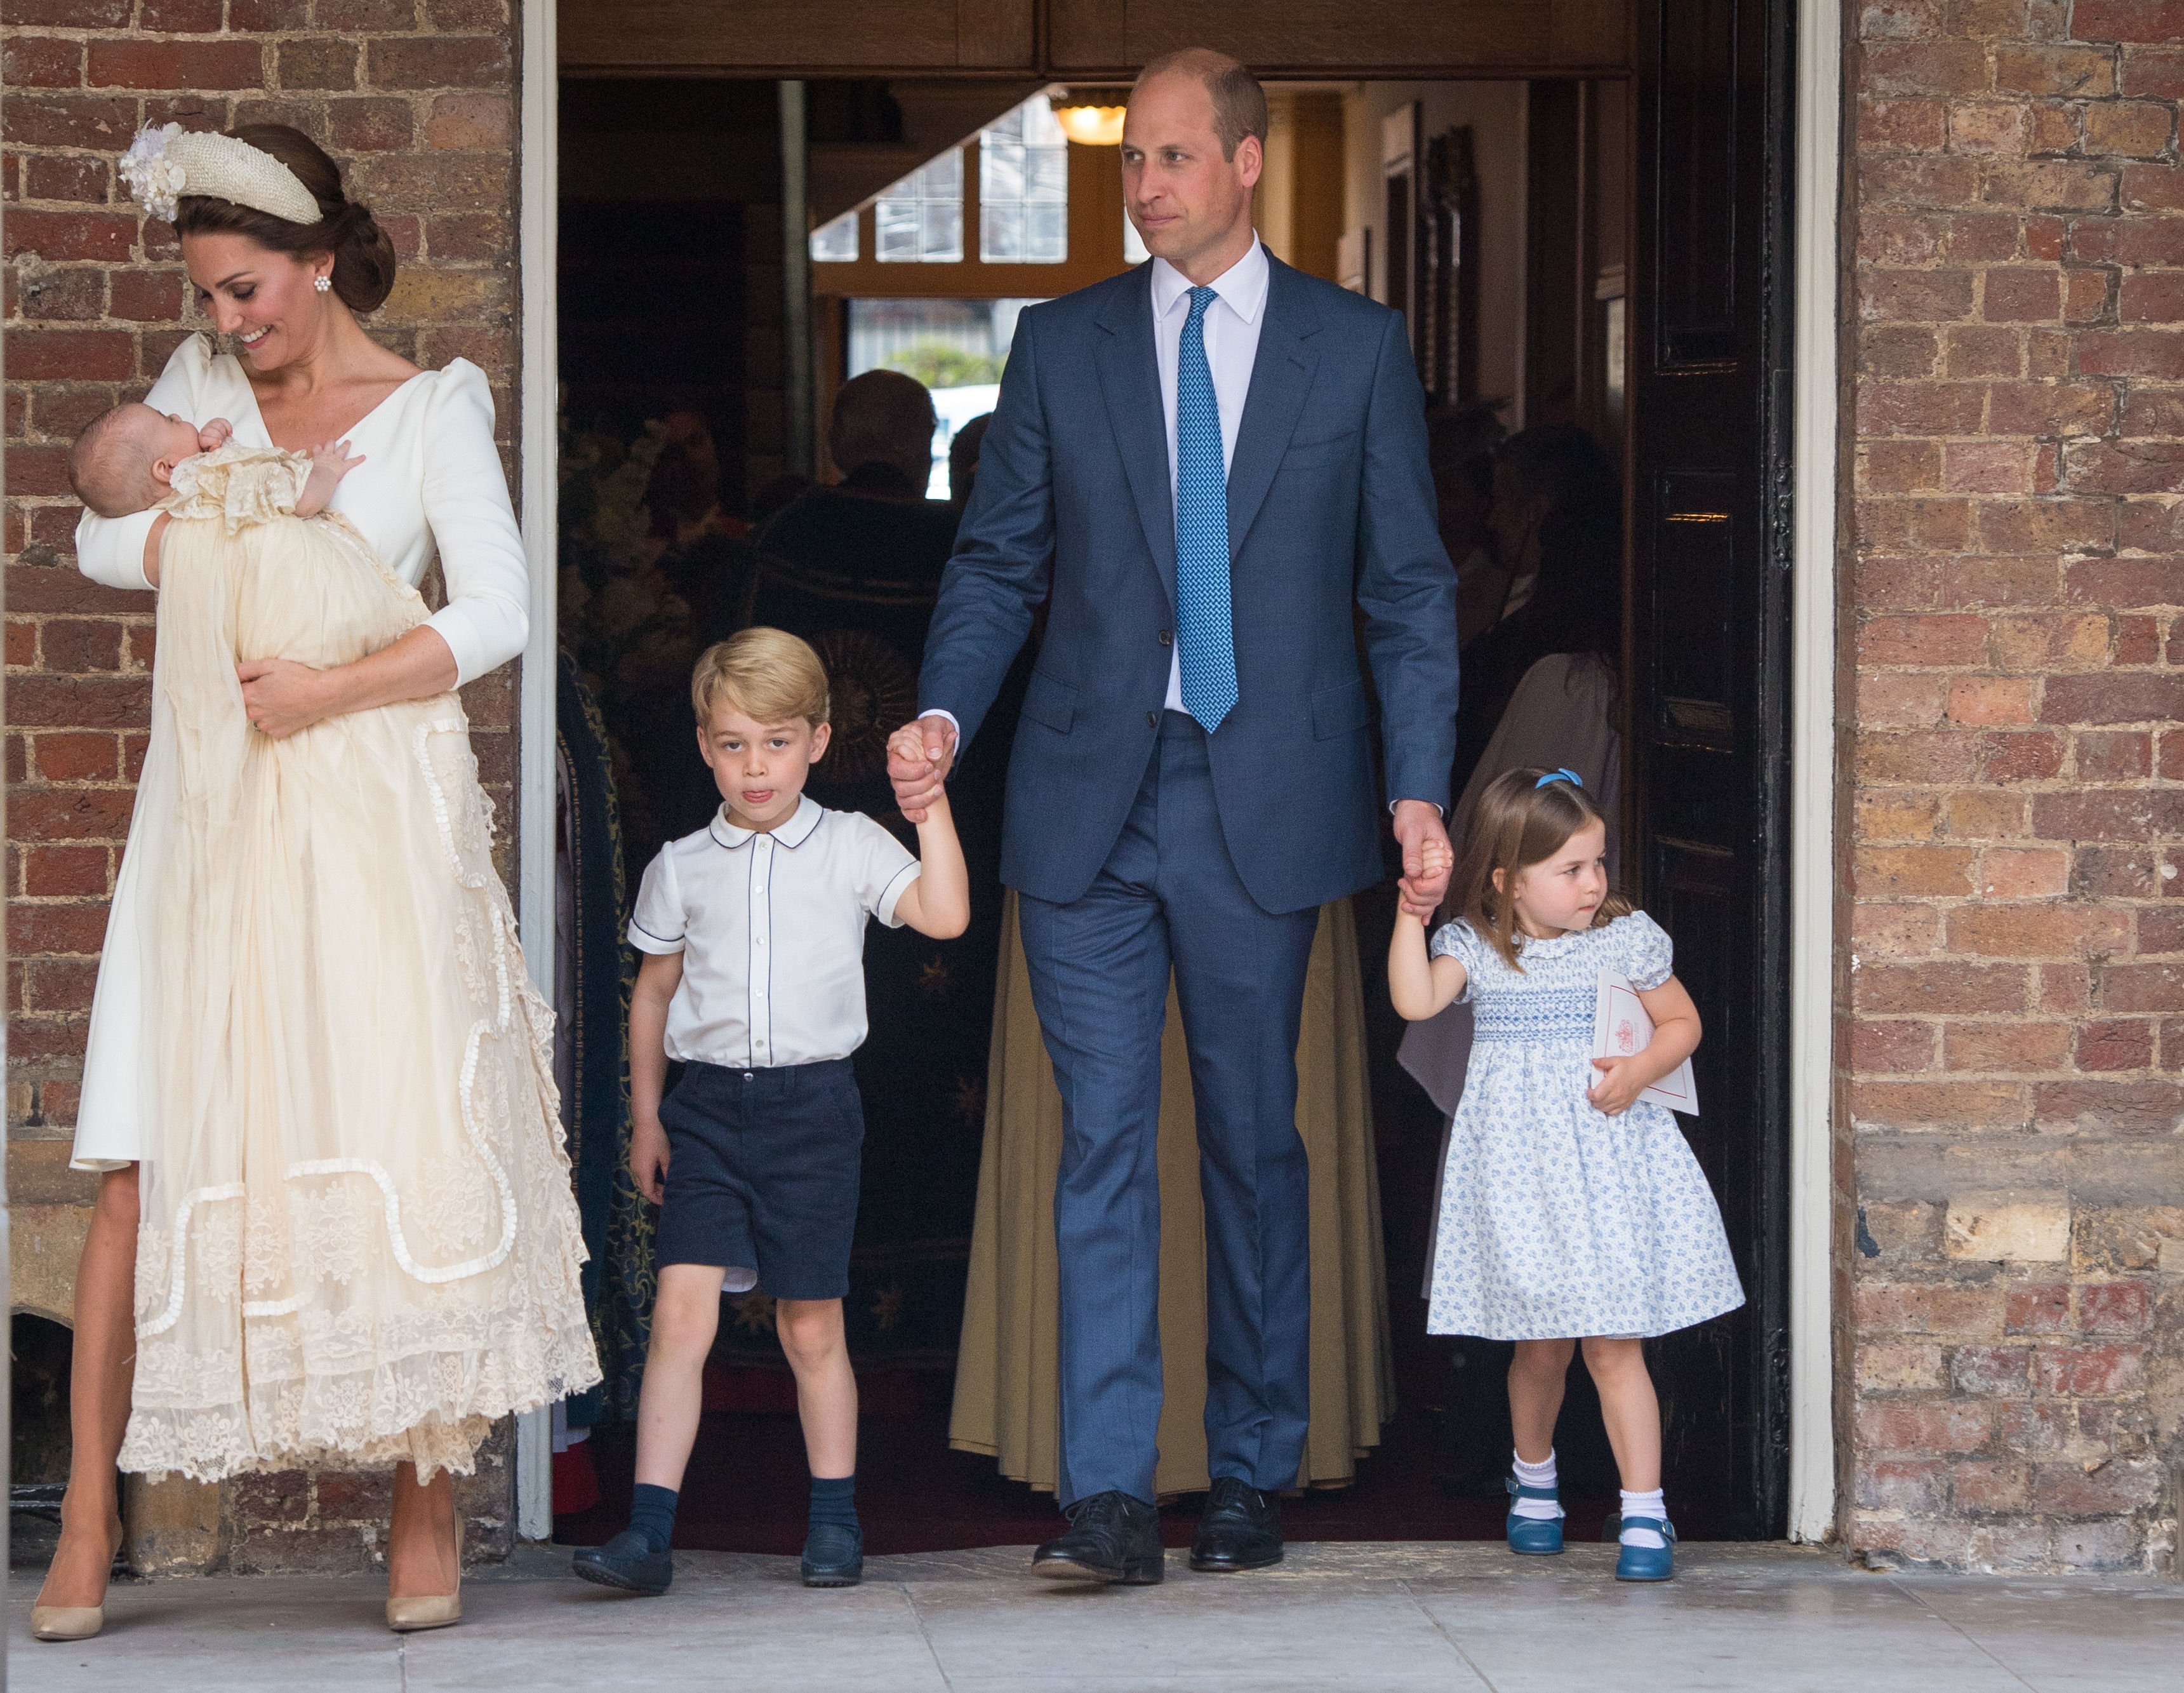 Duchess Kate and Prince William with their children Prince George, Princess Charlotte, and Prince Louis after Louis' christening at St James's Palace on July 09, 2018 in London, England | Photo: Getty Images